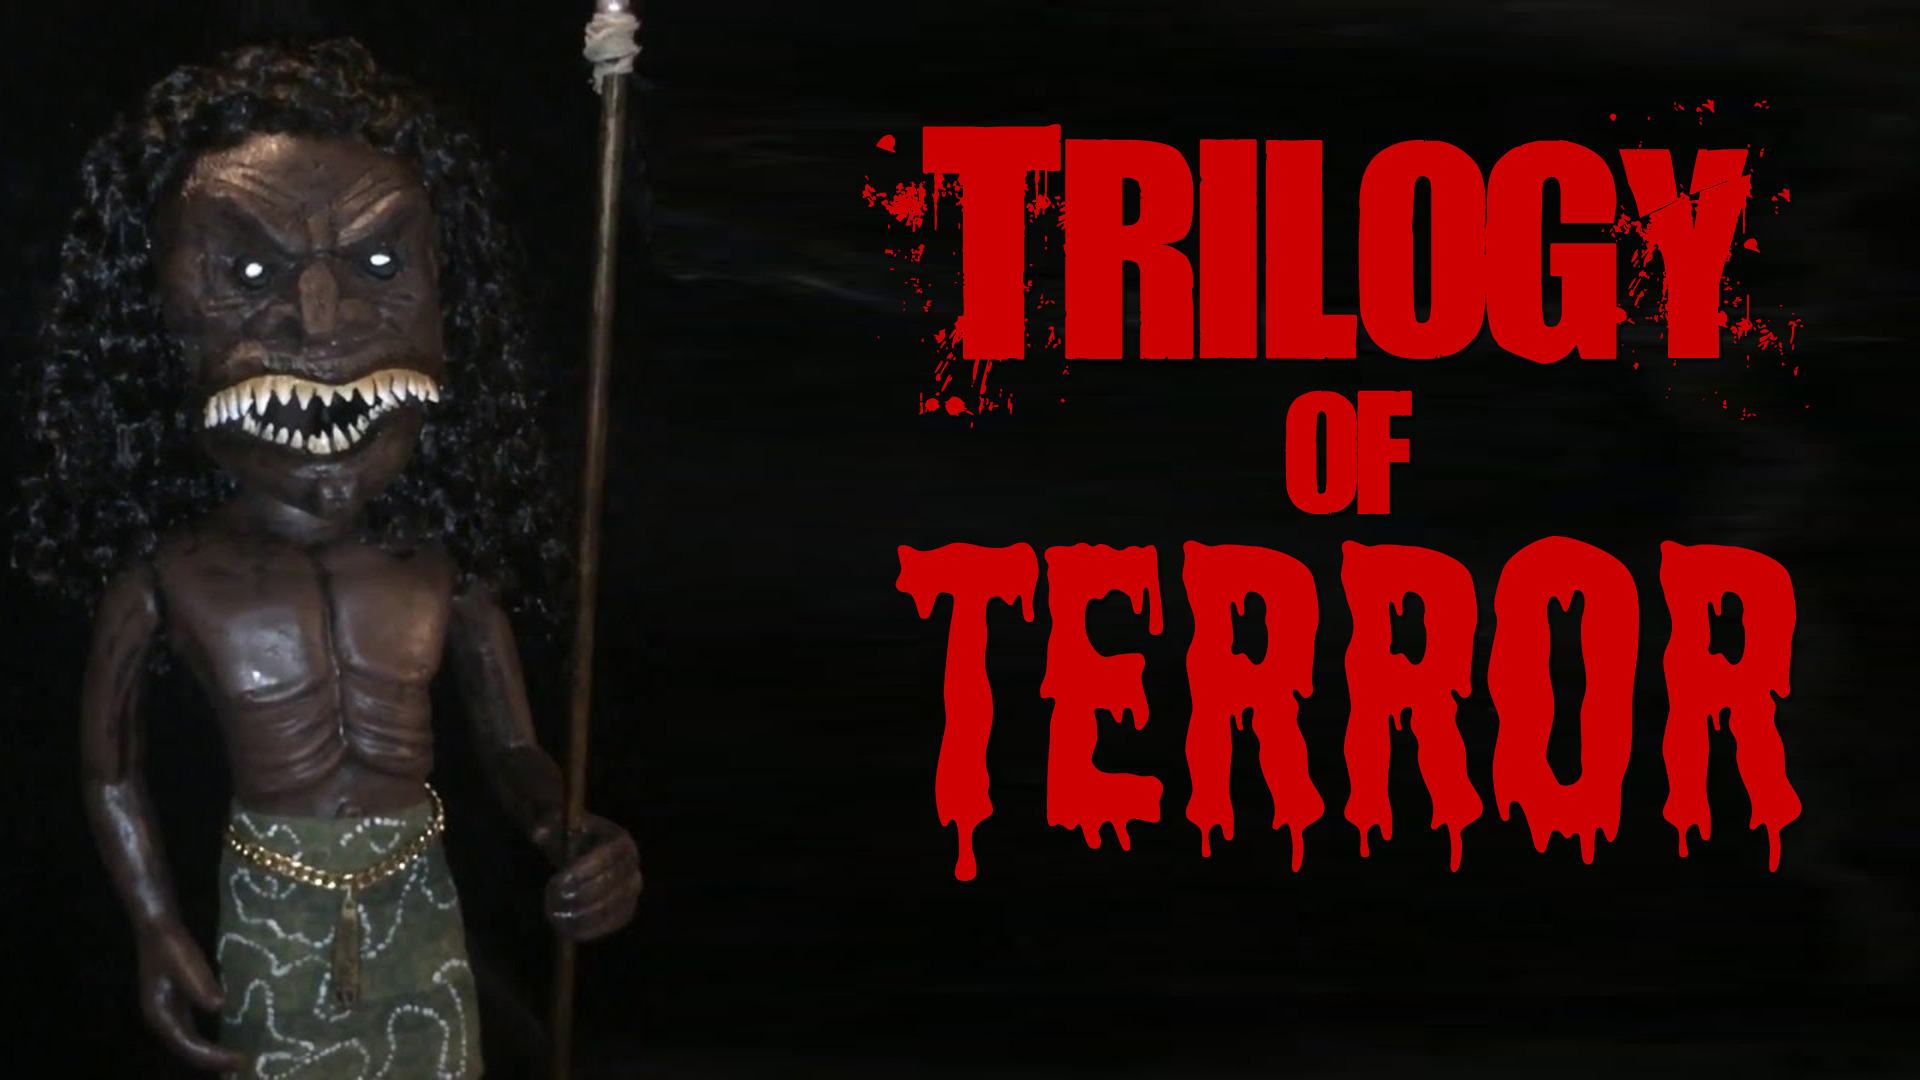 40-facts-about-the-movie-trilogy-of-terror